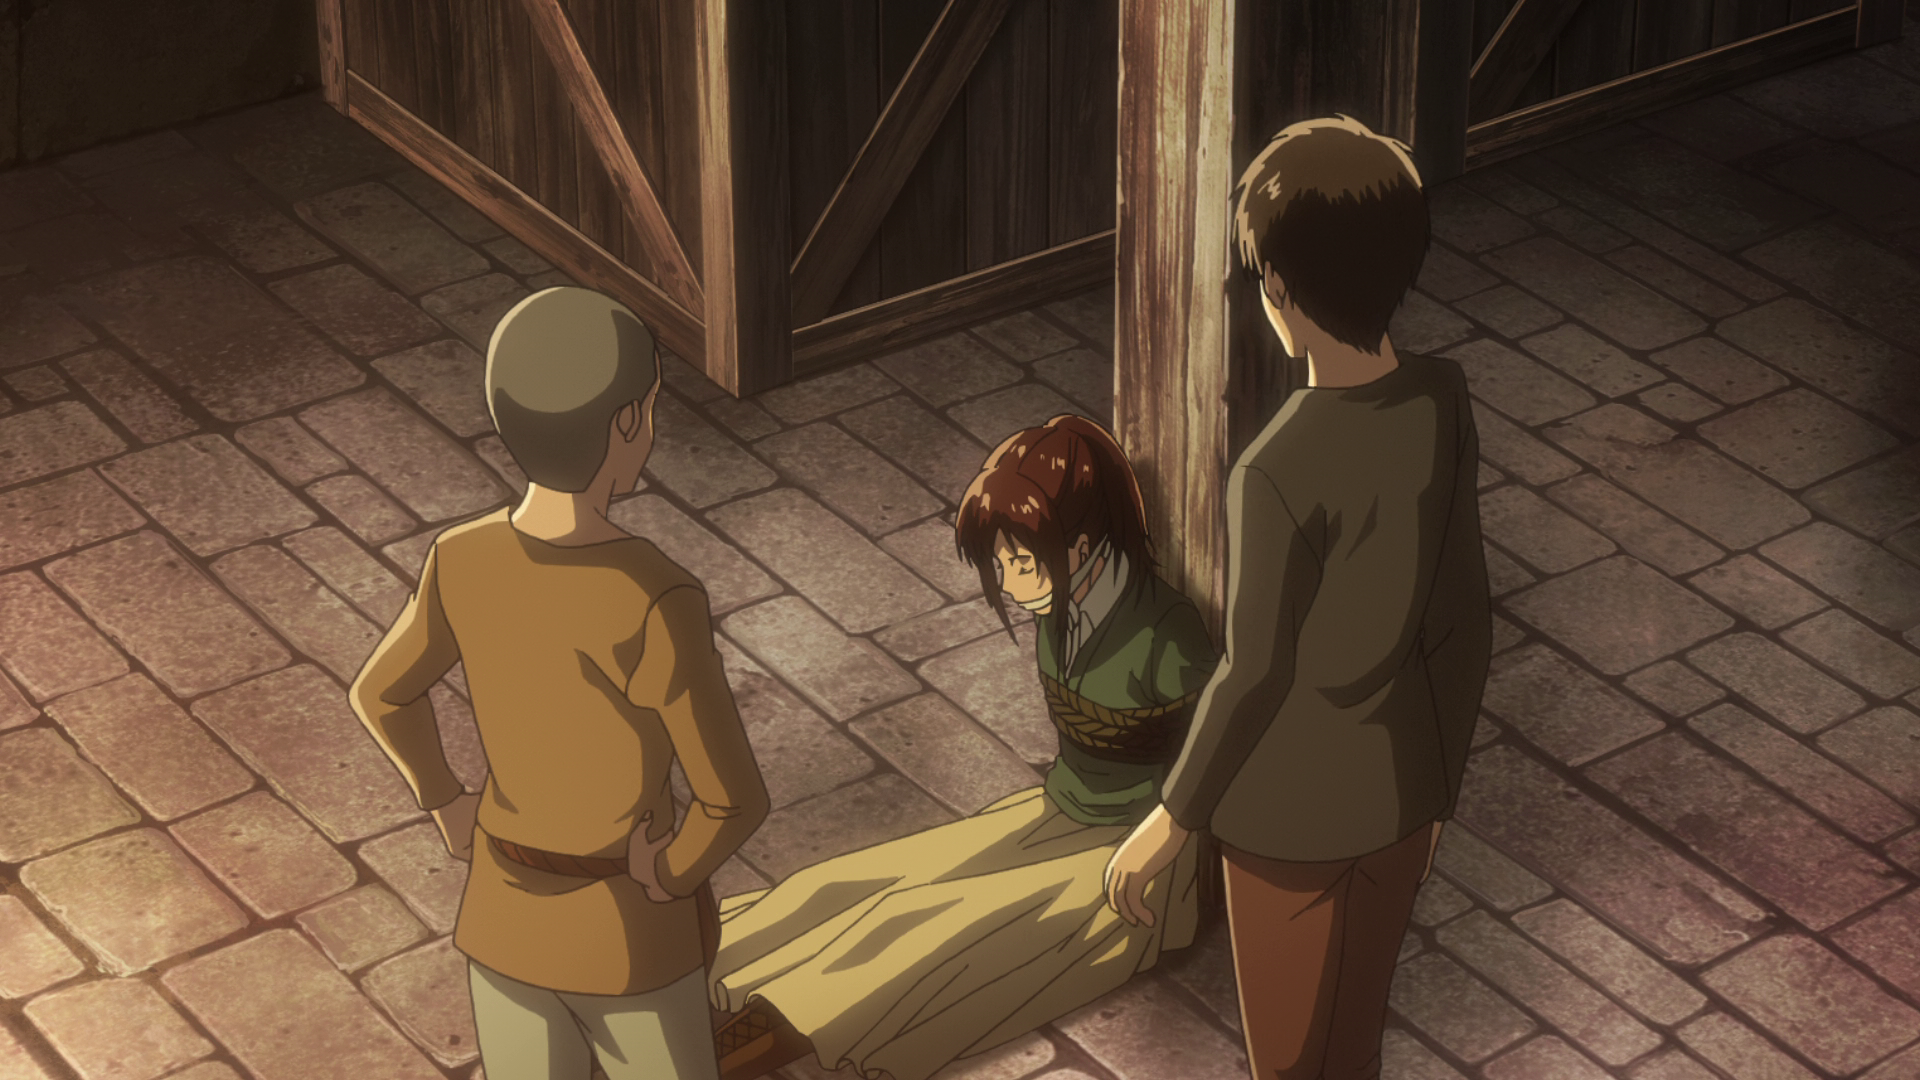 Shingeki no Kyojin: the length of Episode 87, the anime's finale, is  confirmed - Meristation